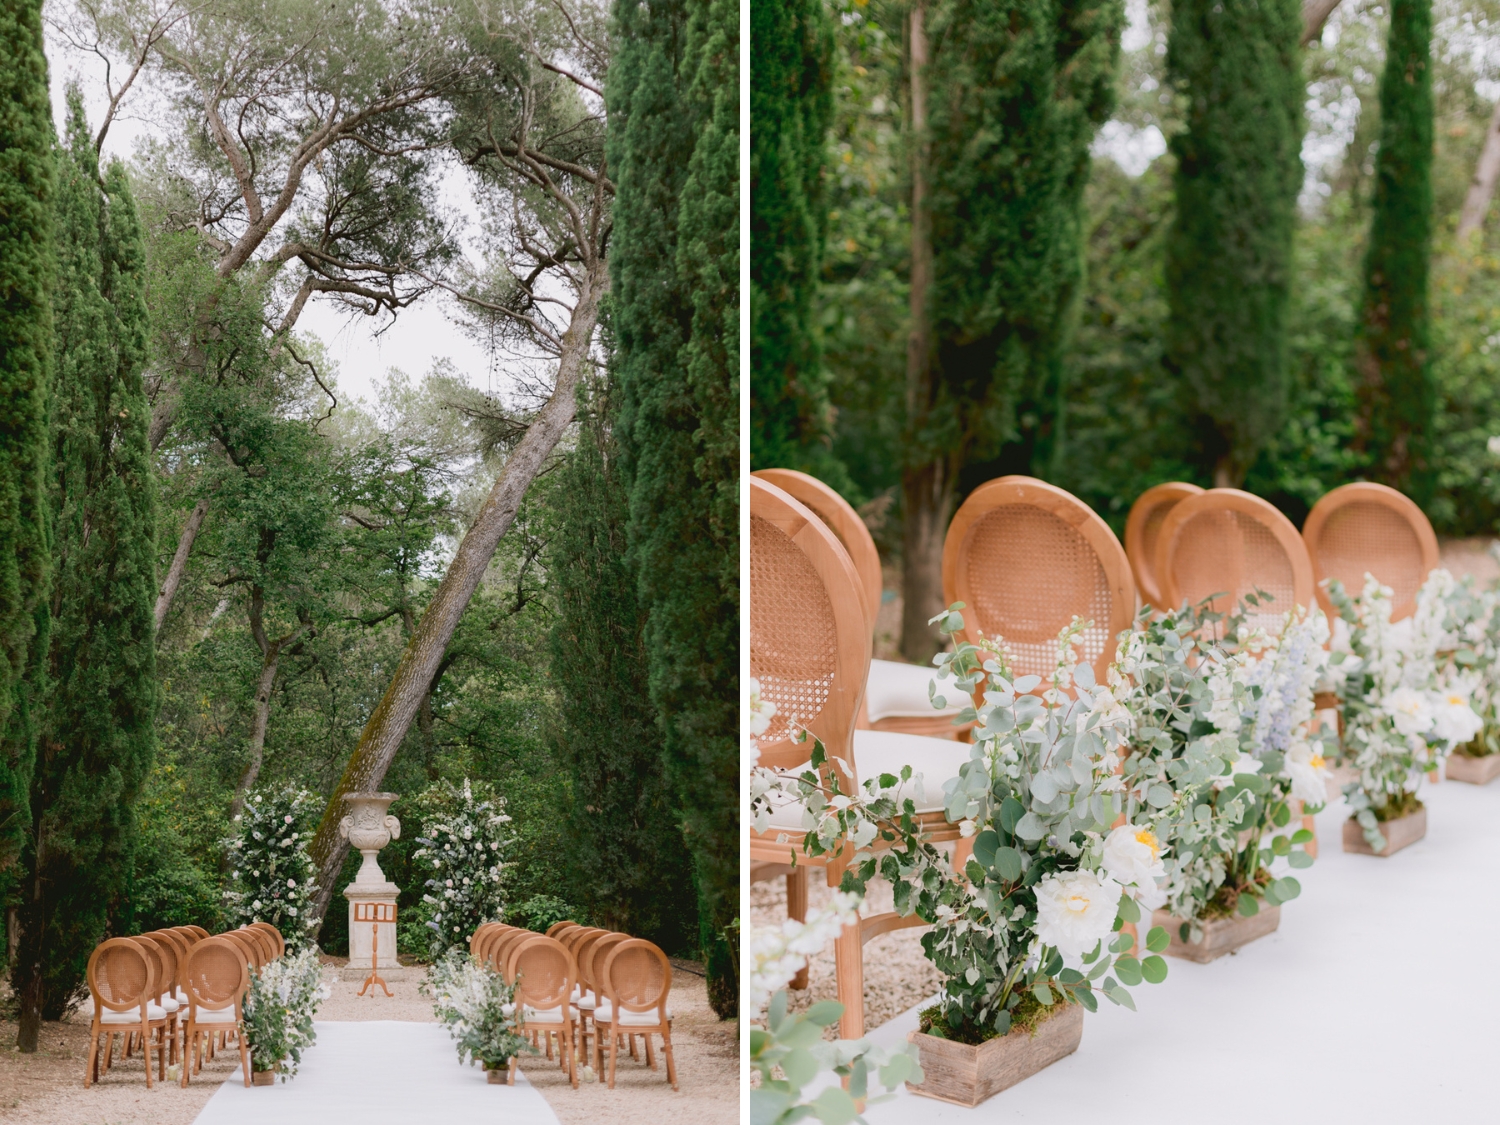 Wedding Ceremony decor at a Spring Wedding at Chateau Martinay in Provence, France